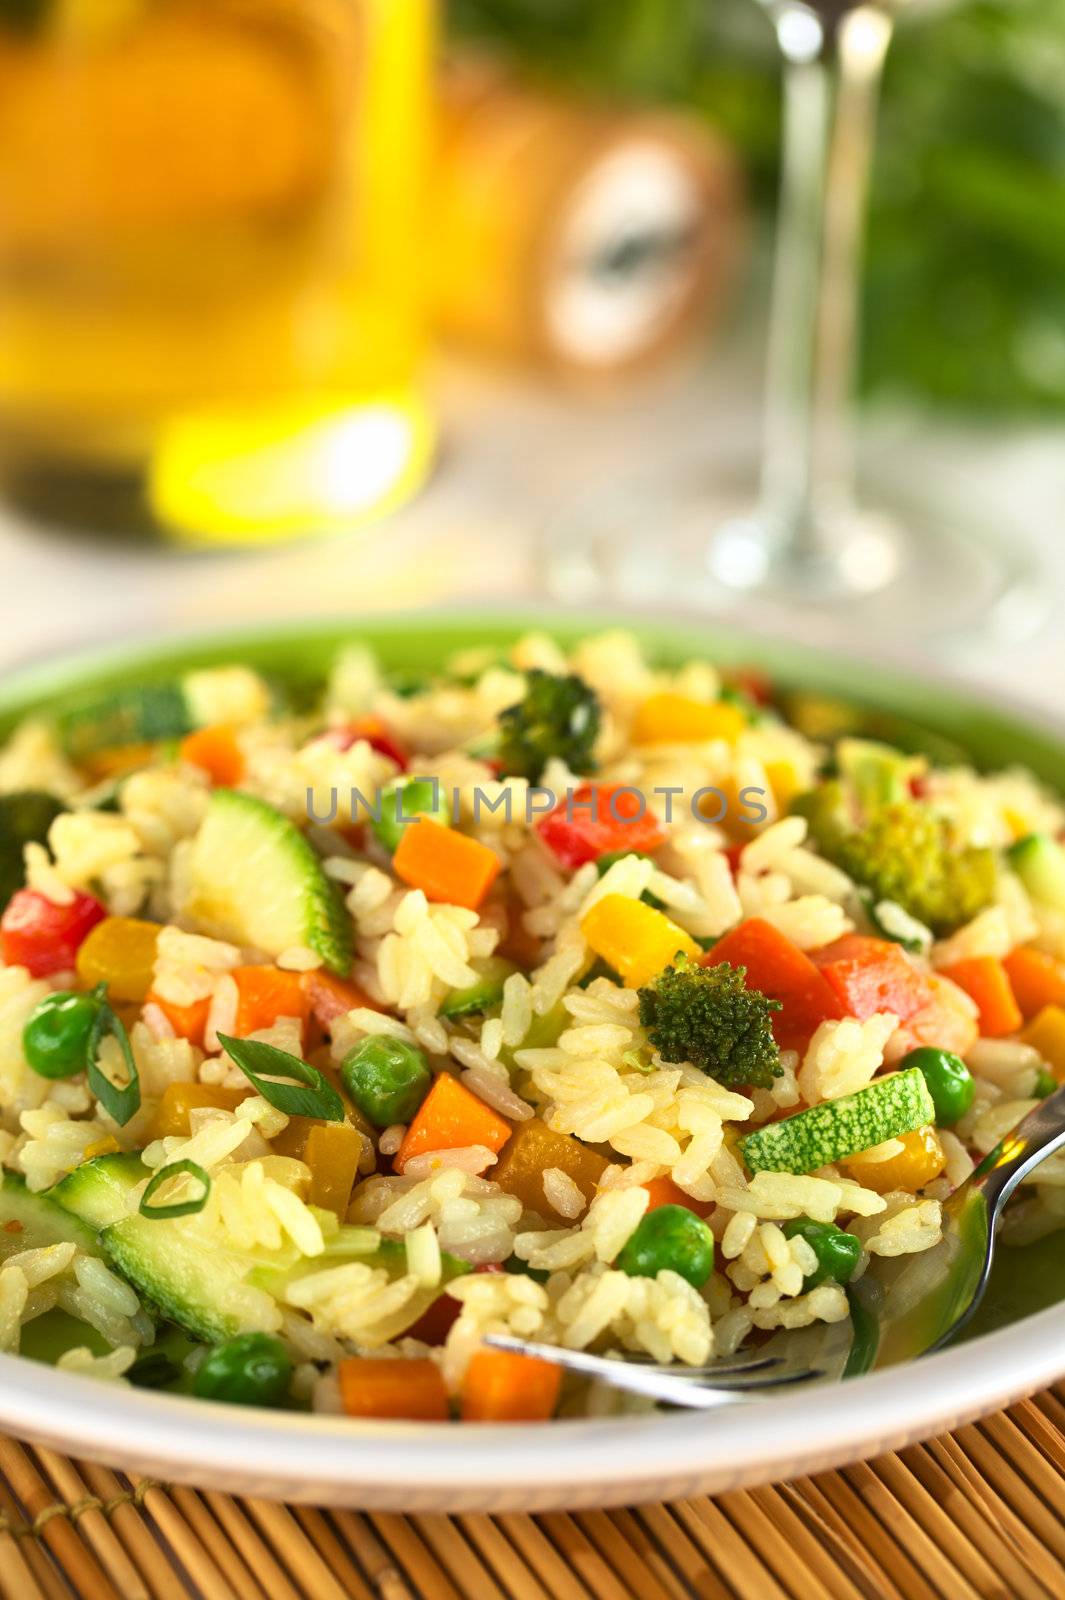 Vegetable risotto made of zucchini, pea, carrot, red bell pepper, broccoli and pumpkin (Selective Focus, Focus on the broccoli in the front) 